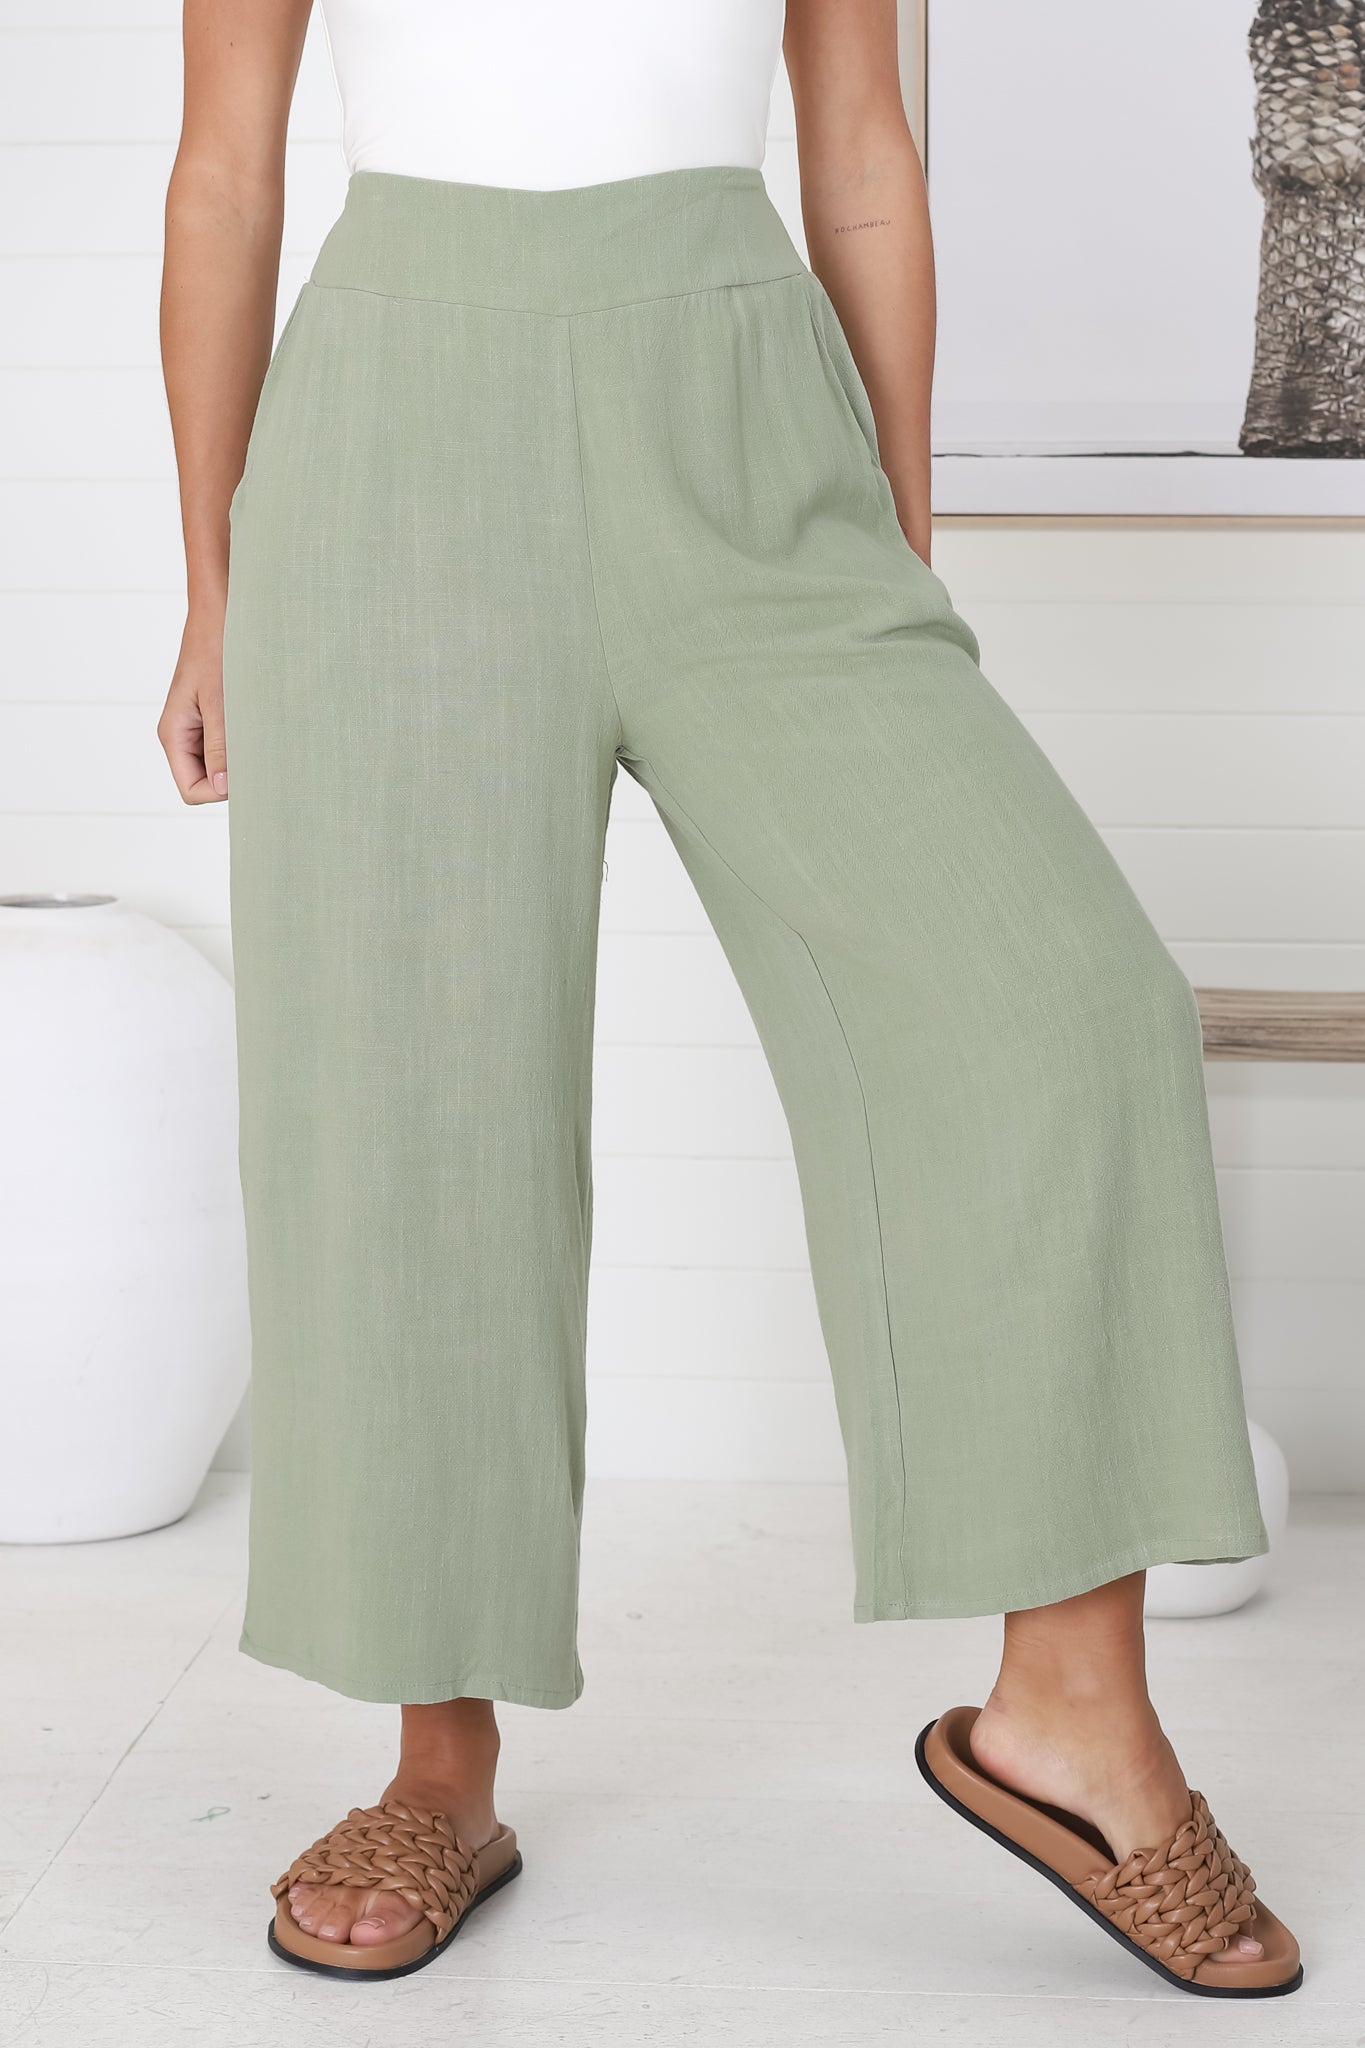 Wyatt Pants - Linen Blend 3/4 Cropped Pants with Pockets in Khaki